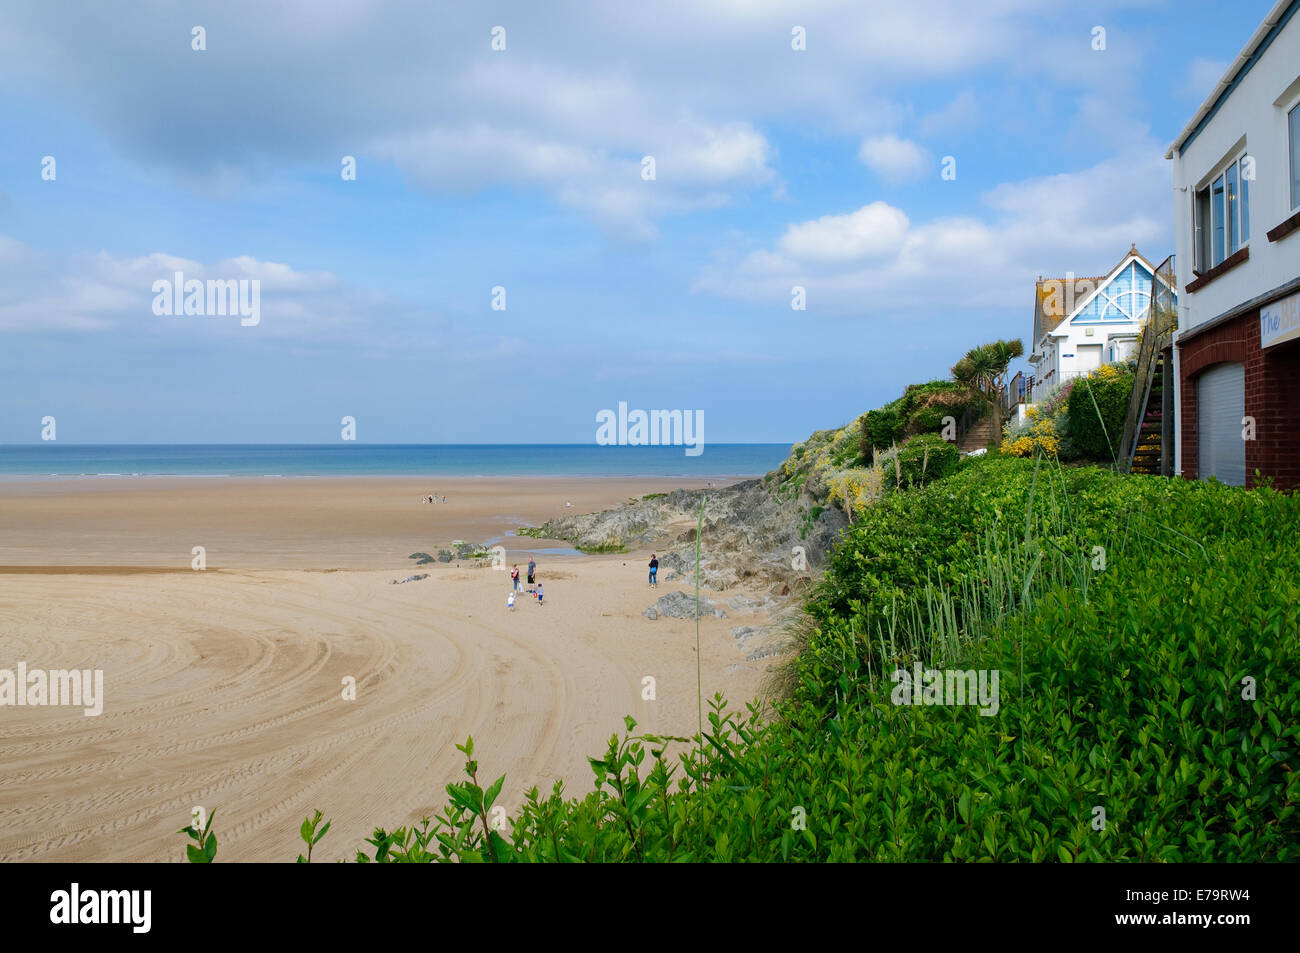 Woolacombe beach in the morning. Woolacombe is a seaside resort on the coast of North Devon, England. Stock Photo